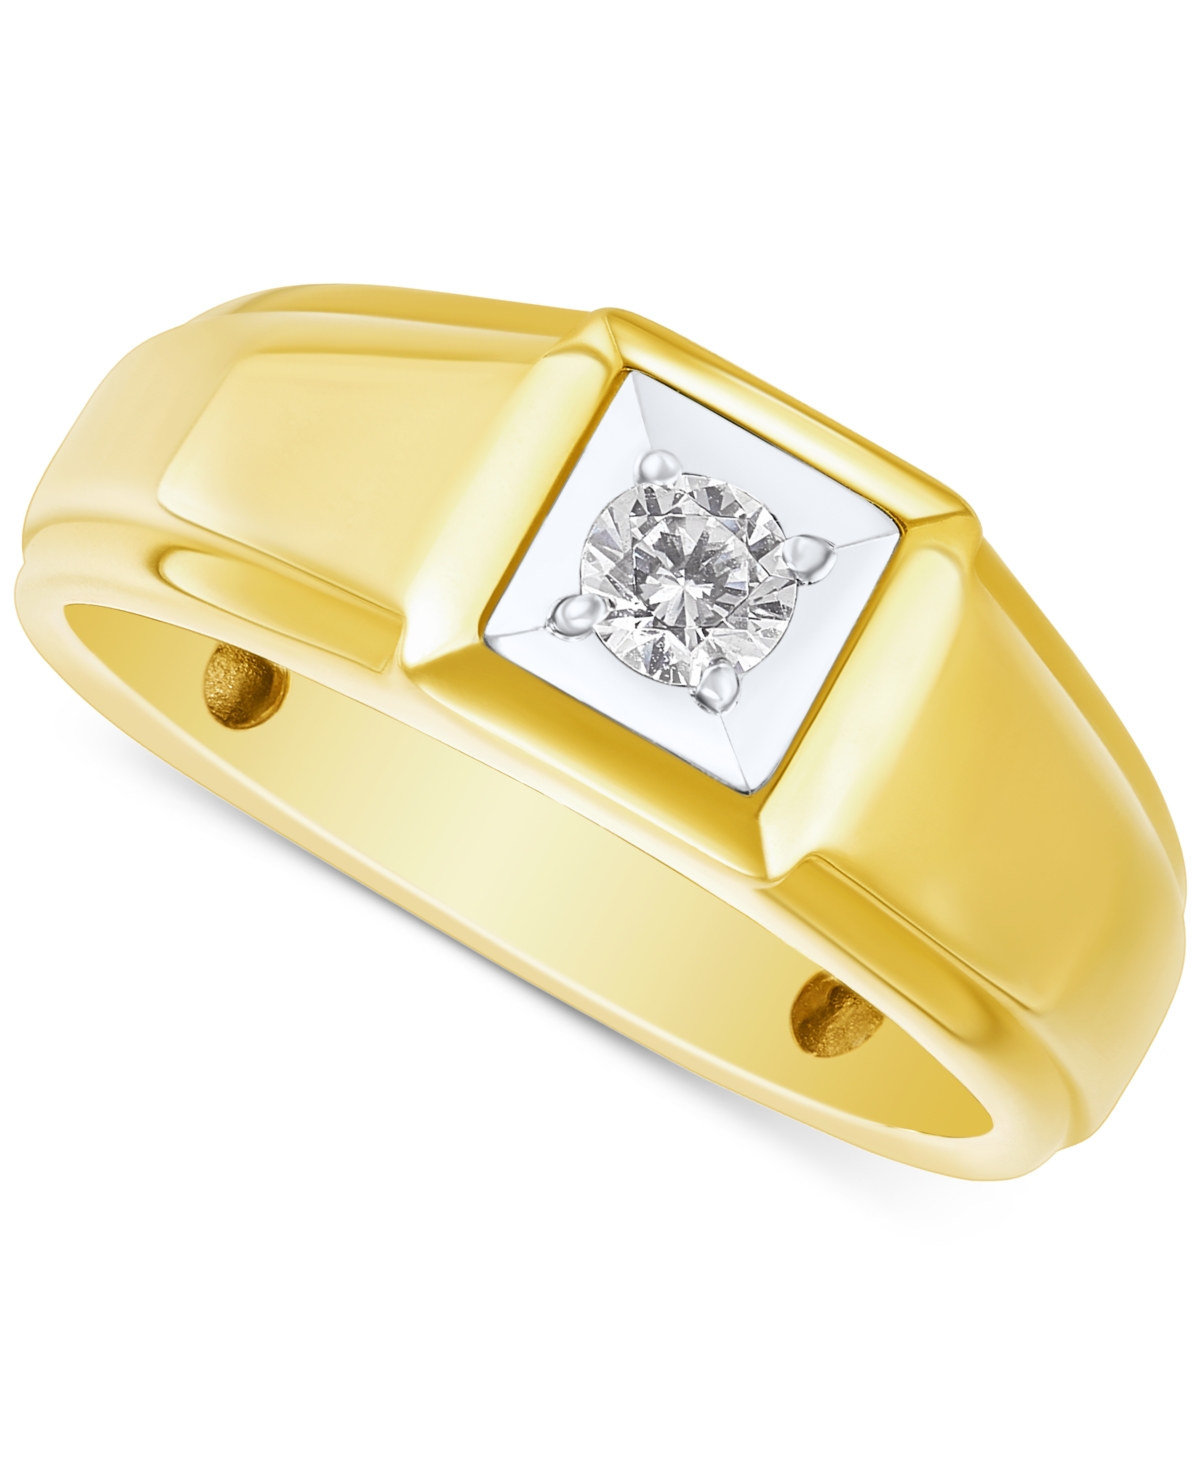 Grown With Love Men's Lab Grown Diamond Solitaire Ring (1/4 ct. t.w.) in 10k Gold & White Gold